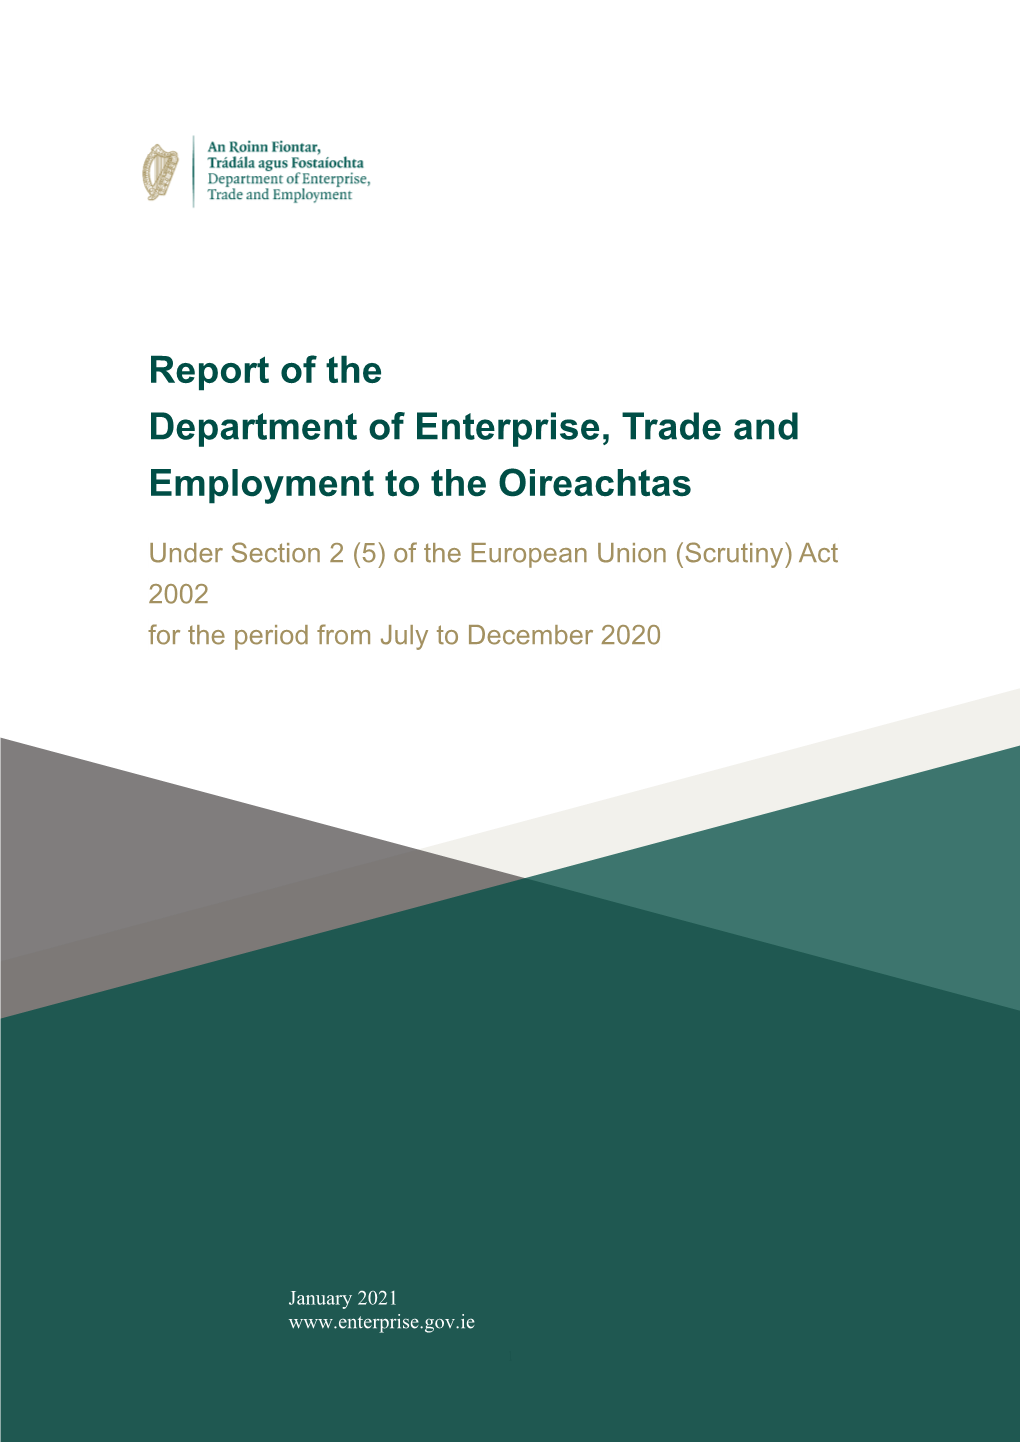 Report of the Department of Enterprise, Trade and Employment to the Oireachtas